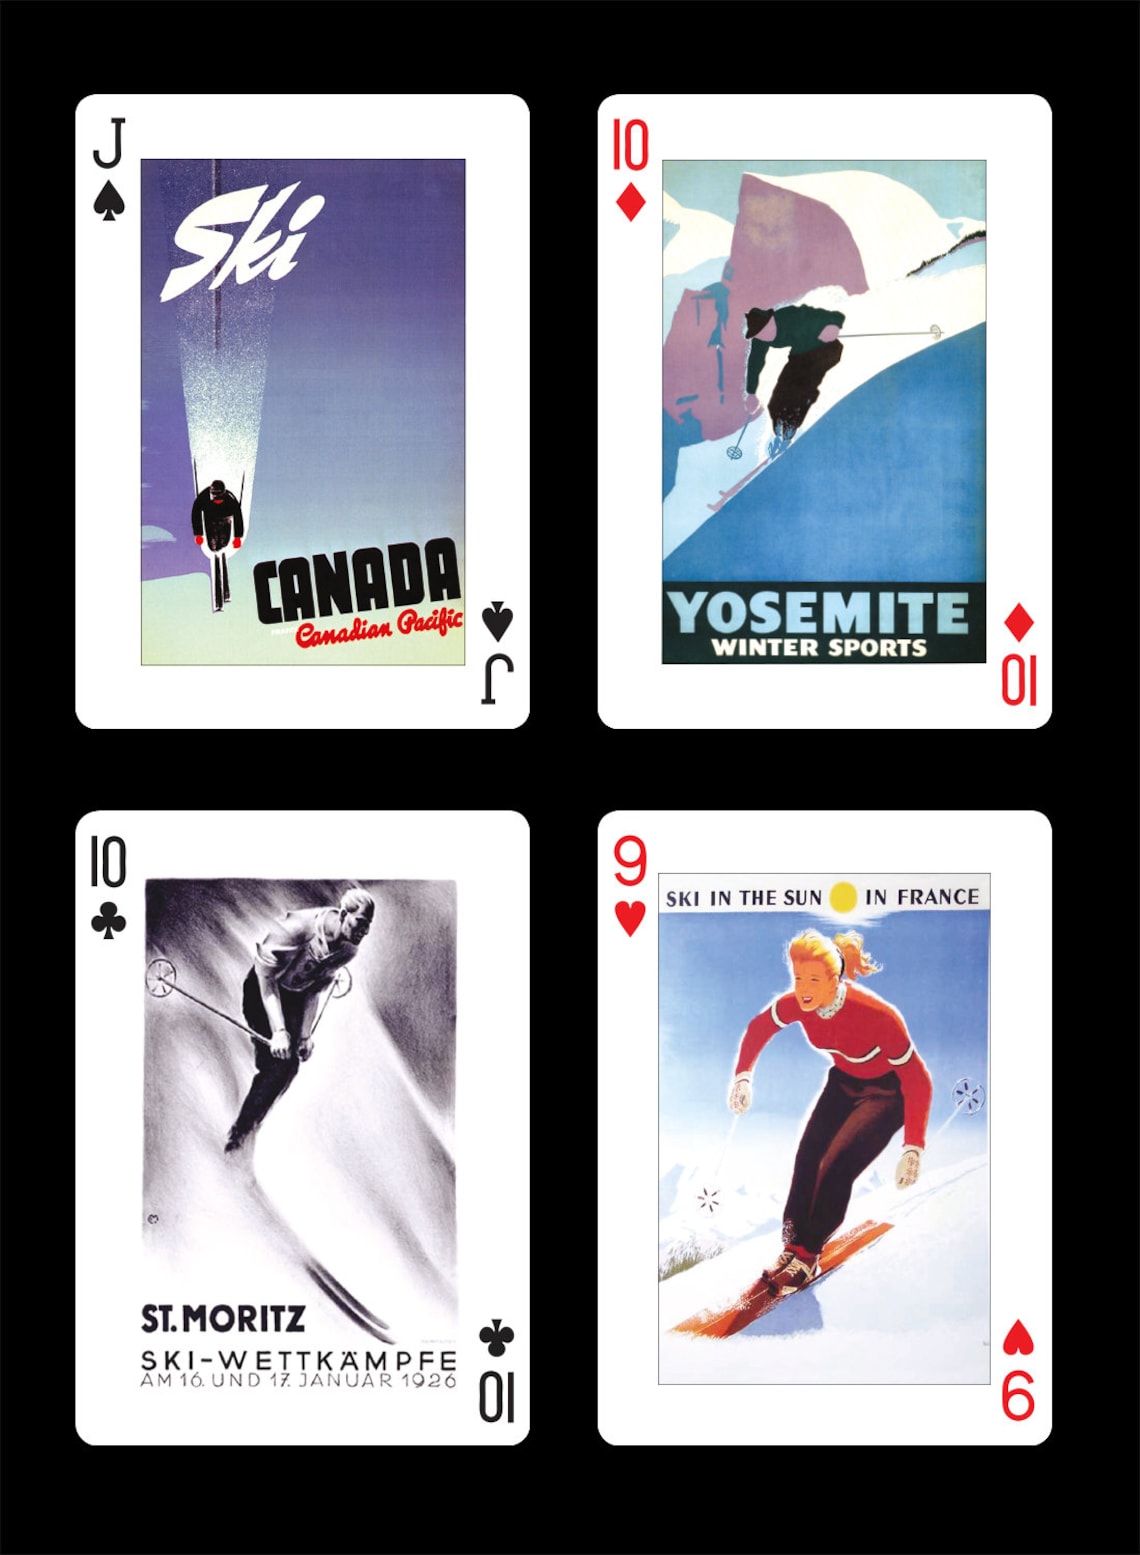 Image of 4 paying cards with art from famous vintage transport and sporting posters. Canada Canadian Pacific, Yosemite Winter Sports, St Moritz & Ski in the sun in France.